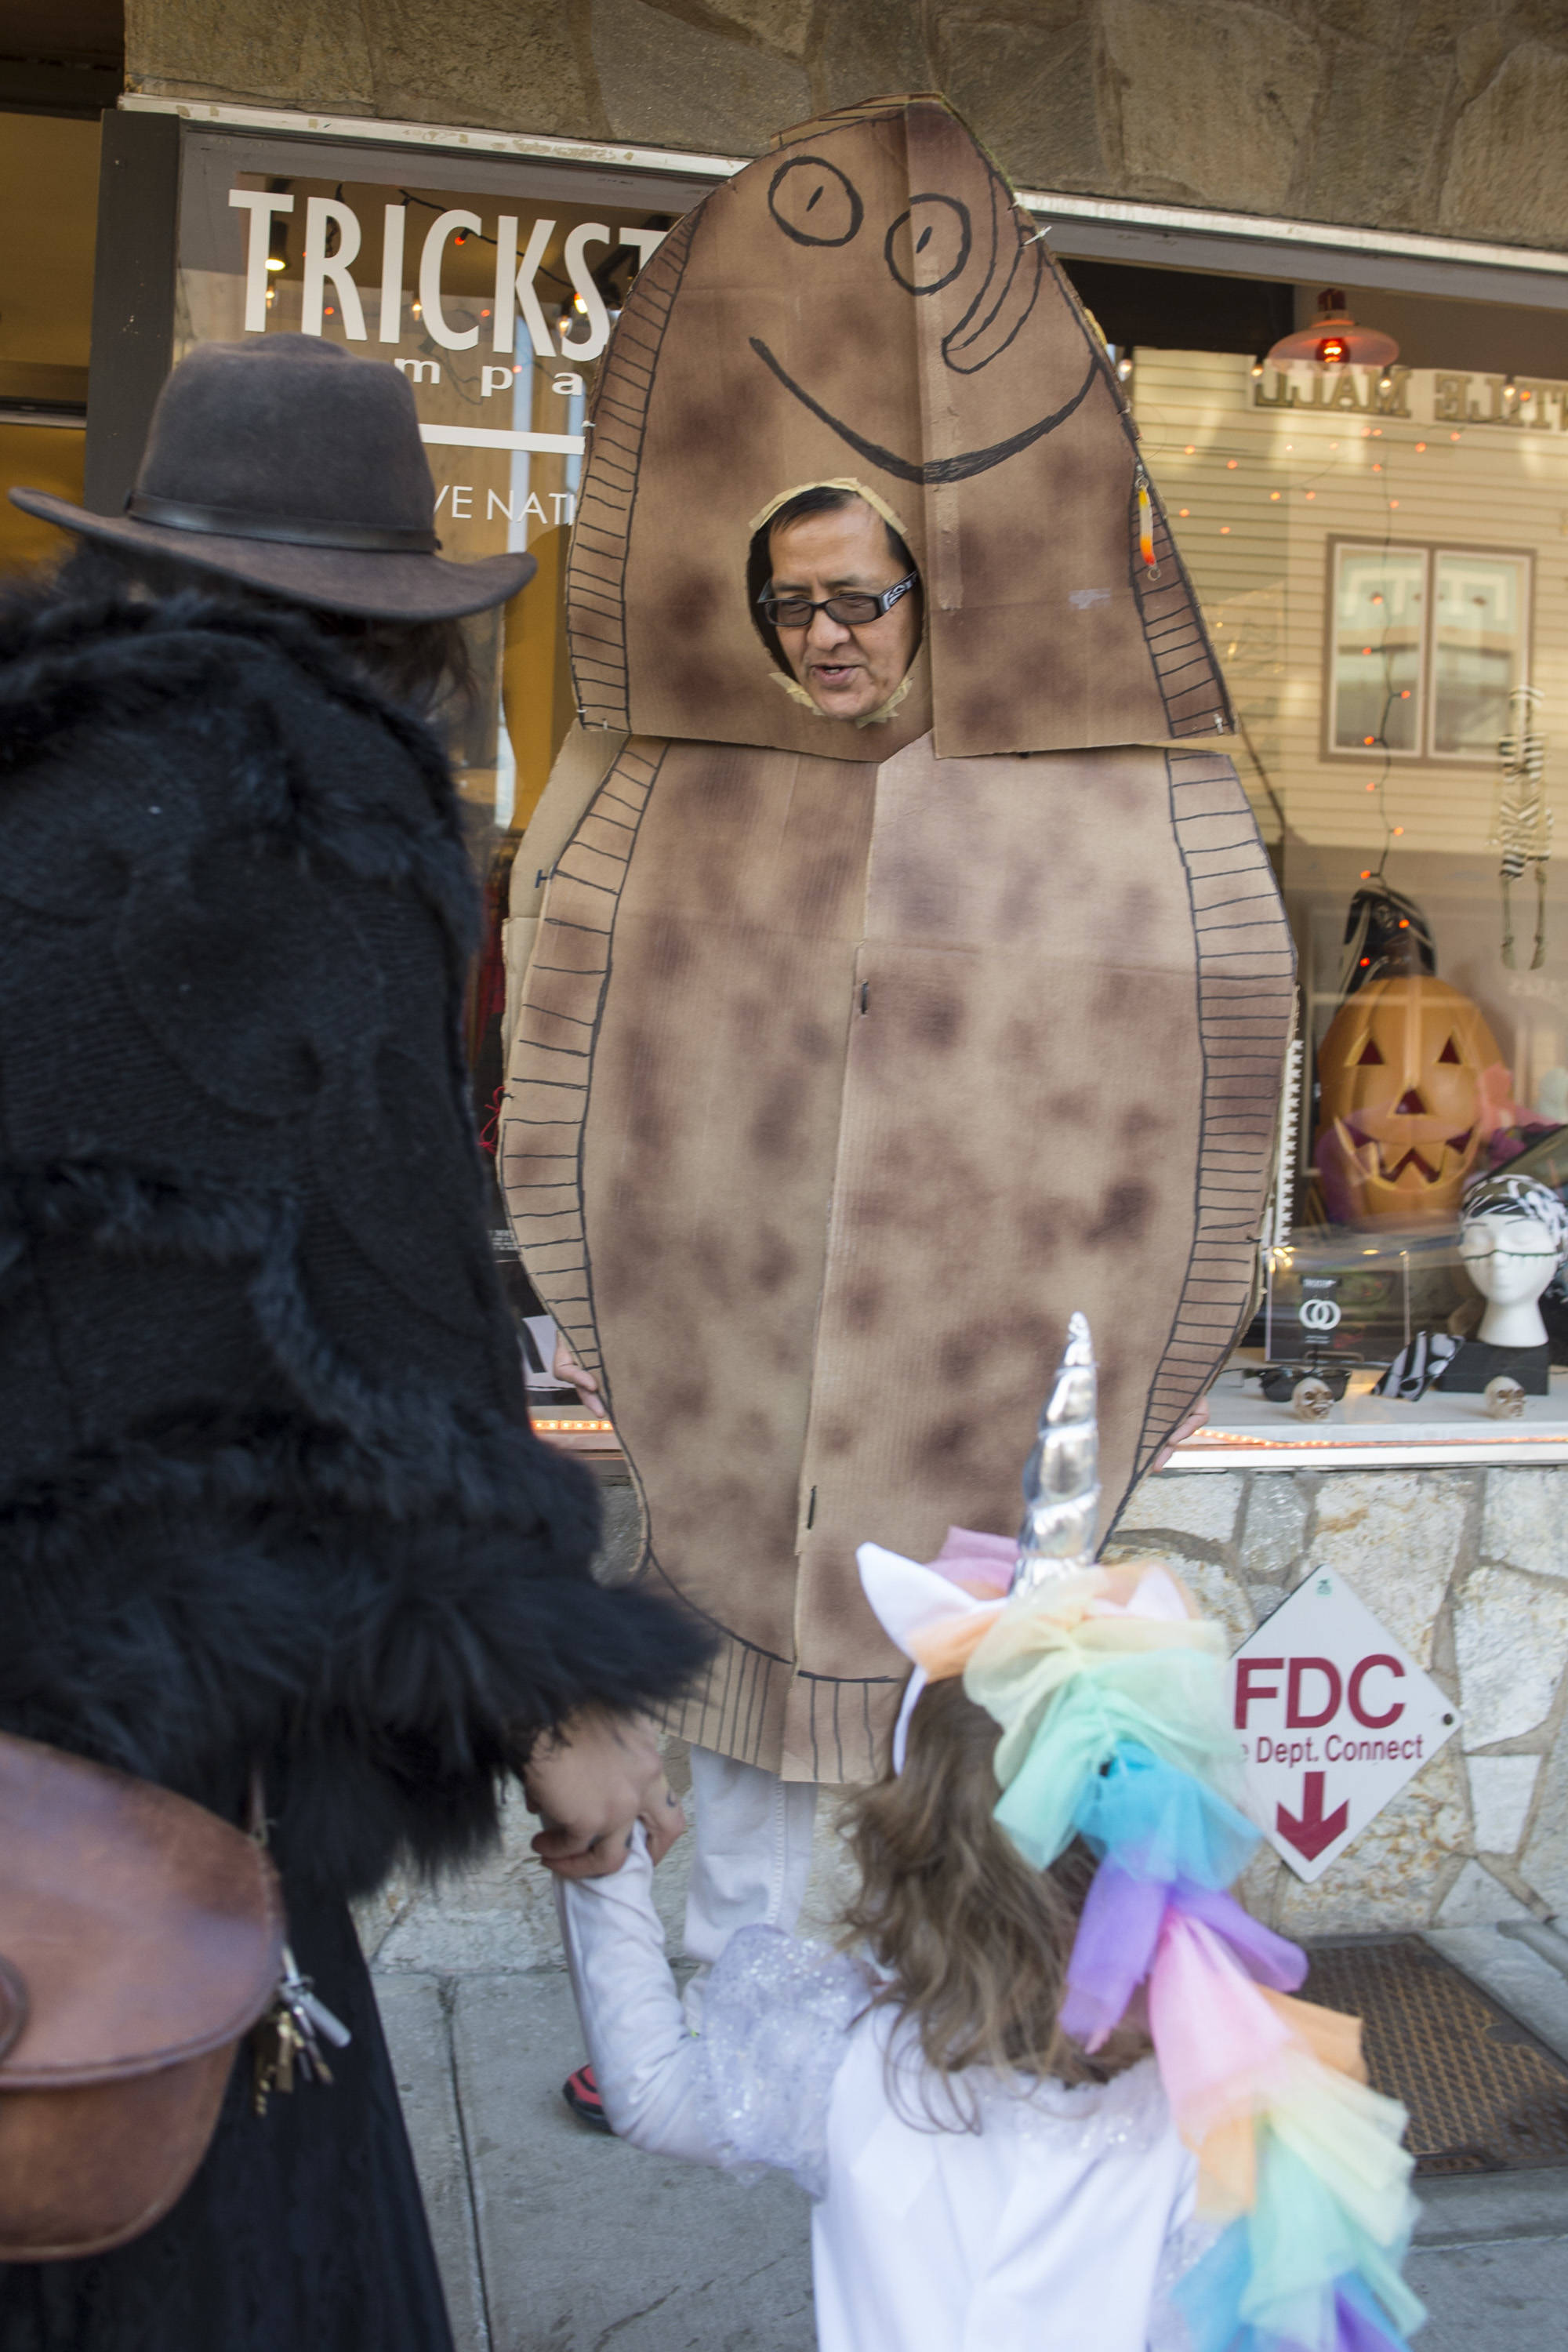 Ricardo Worl greets trick-or-treaters outside of Trickster on Wednesday, Oct. 31, 2018. For the fourth year Kindred Post has organized the Halloween celebration for trick-or-treaters. (Michael Penn | Juneau Empire)                                Ricardo Worl greets trick-or-treaters outside of Trickster on Wednesday, Oct. 31, 2018. For the fourth year Kindred Post has organized the Halloween celebration for trick-or-treaters. (Michael Penn | Juneau Empire)